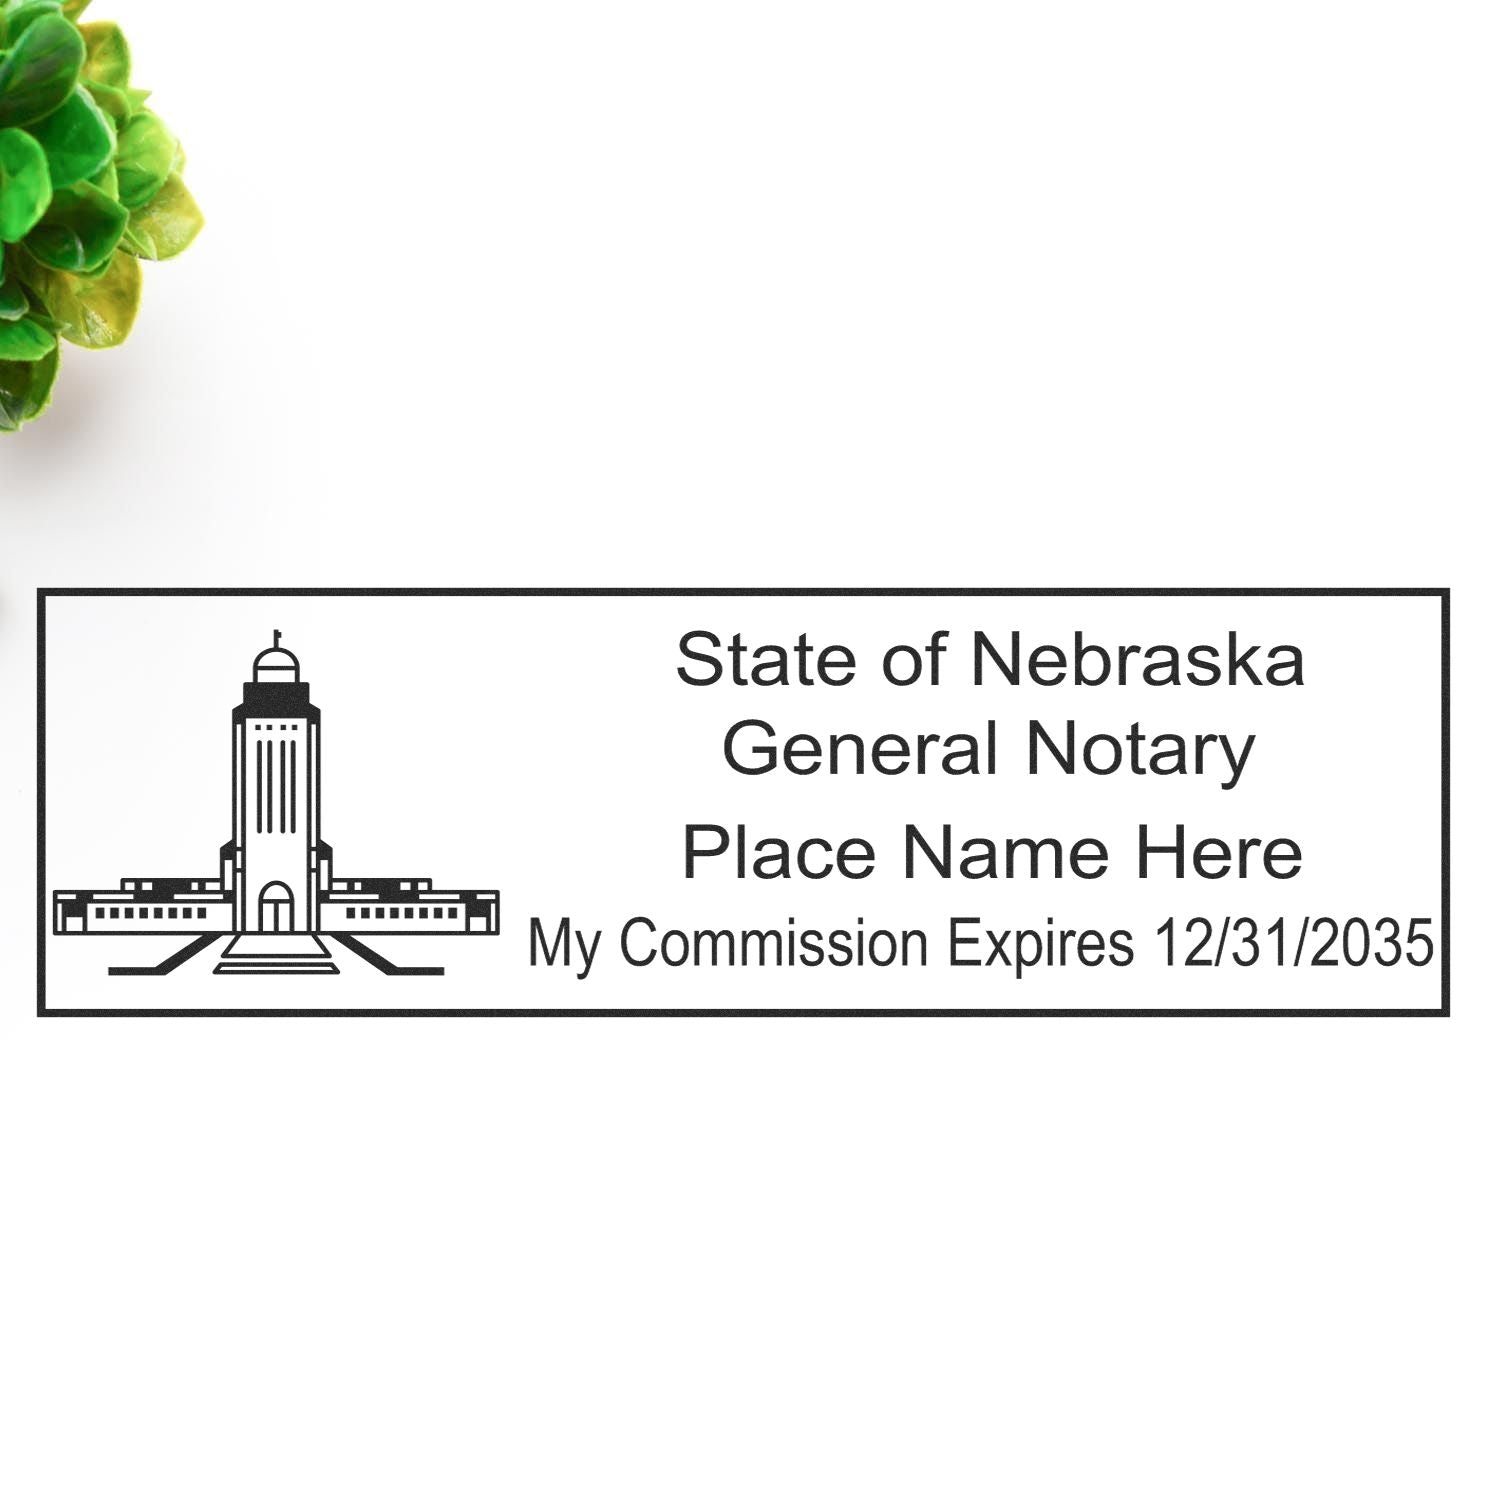 The main image for the MaxLight Premium Pre-Inked Nebraska State Seal Notarial Stamp depicting a sample of the imprint and electronic files